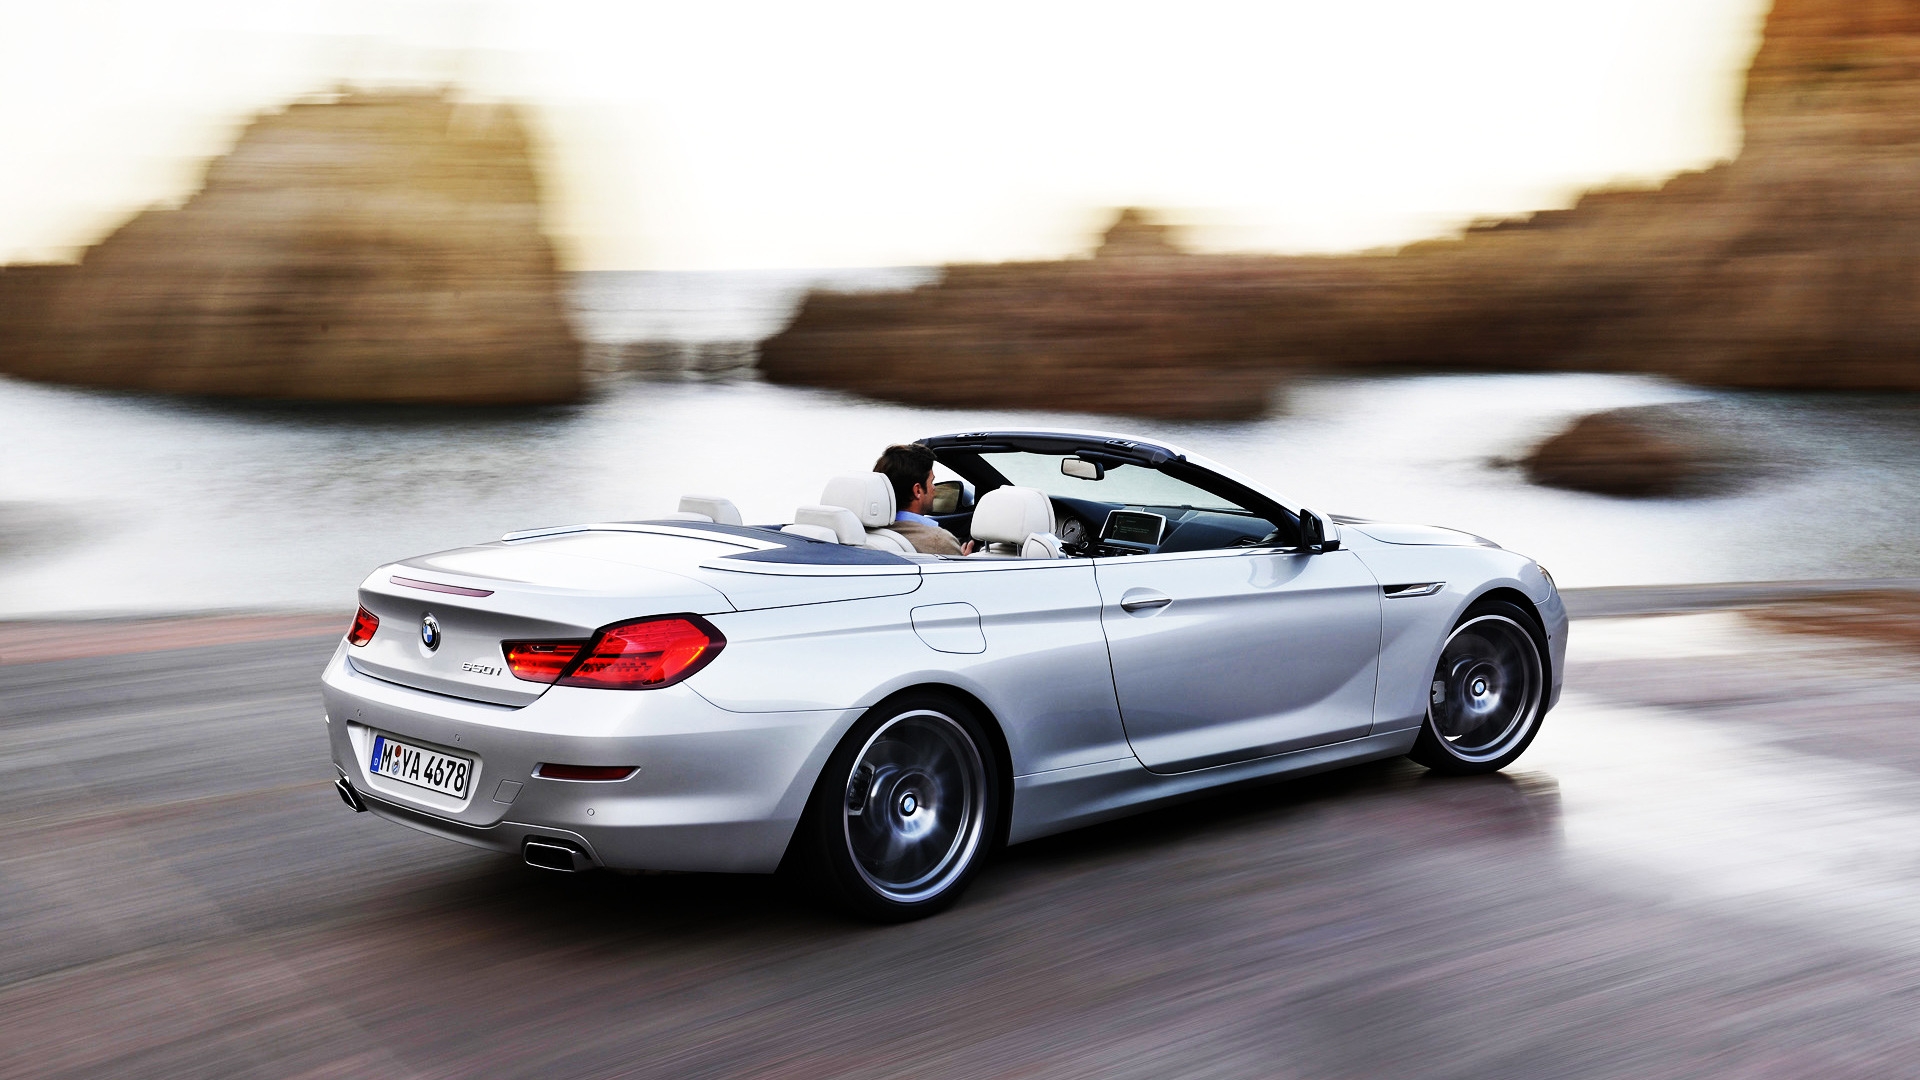 2011 BMW 6 Series Convertible for 1920 x 1080 HDTV 1080p resolution